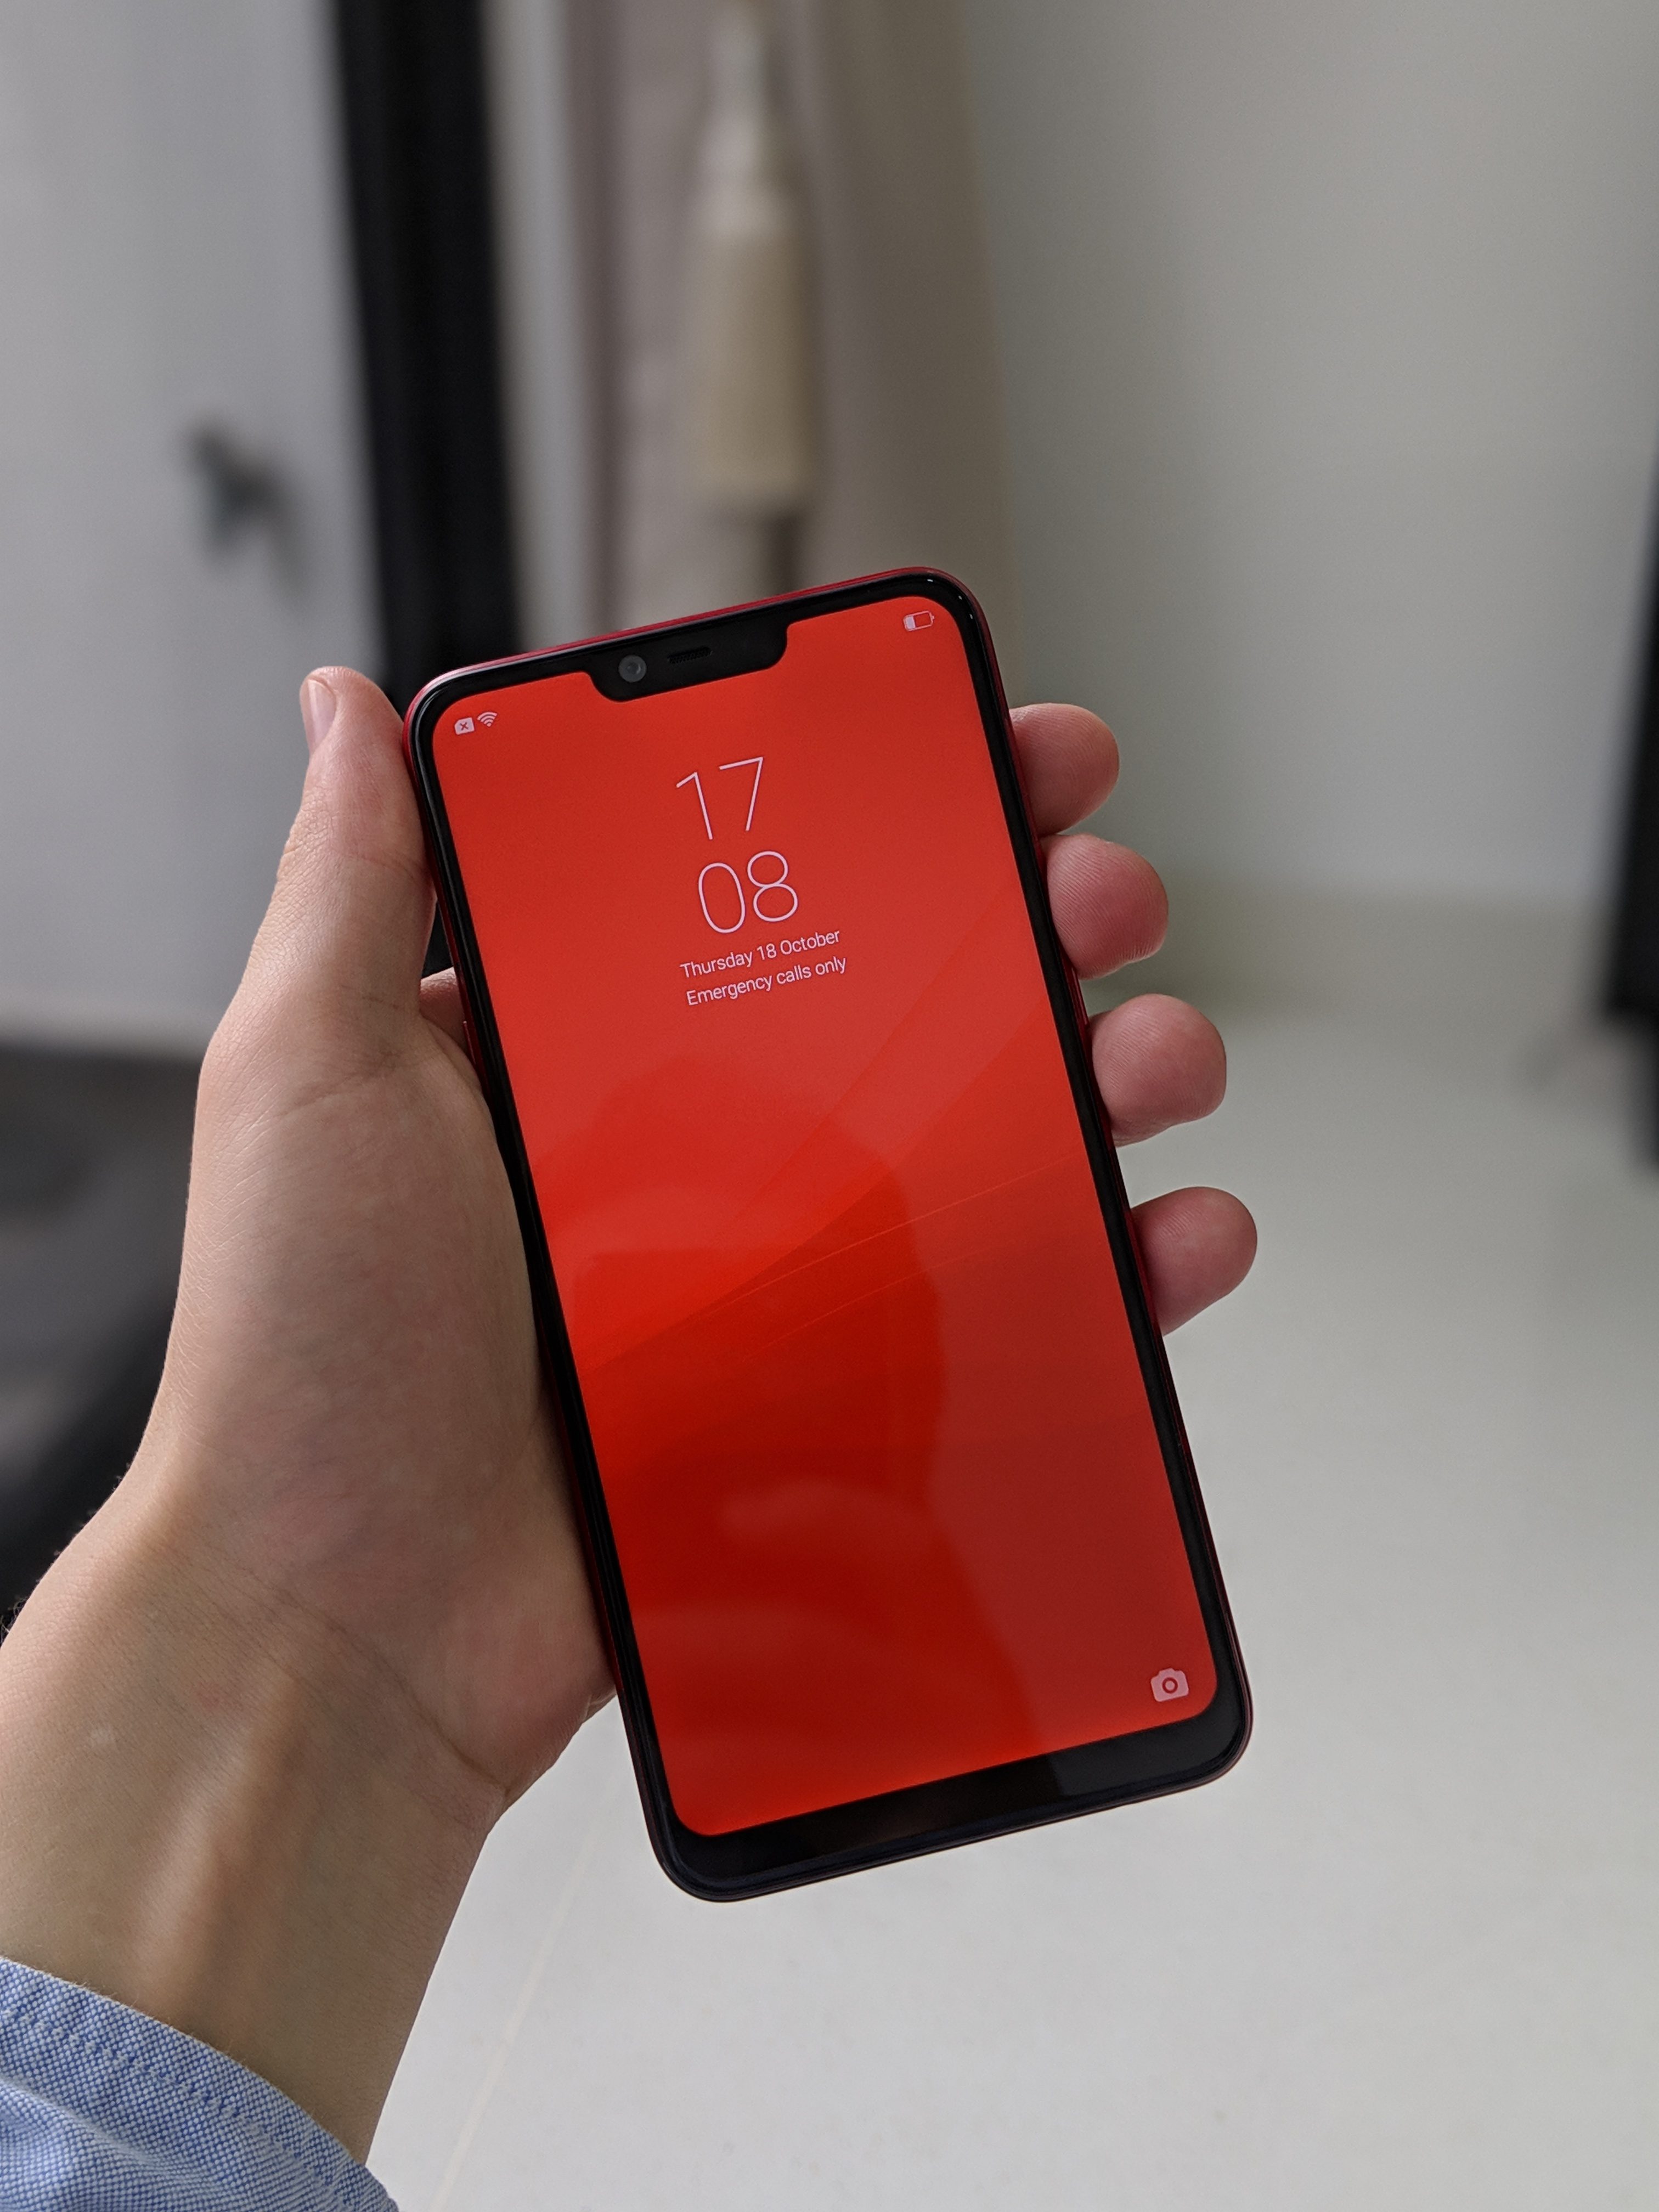 OPPO’s Realme 2 is a SUPER cheap $120 phone with a 6.2-inch notch display